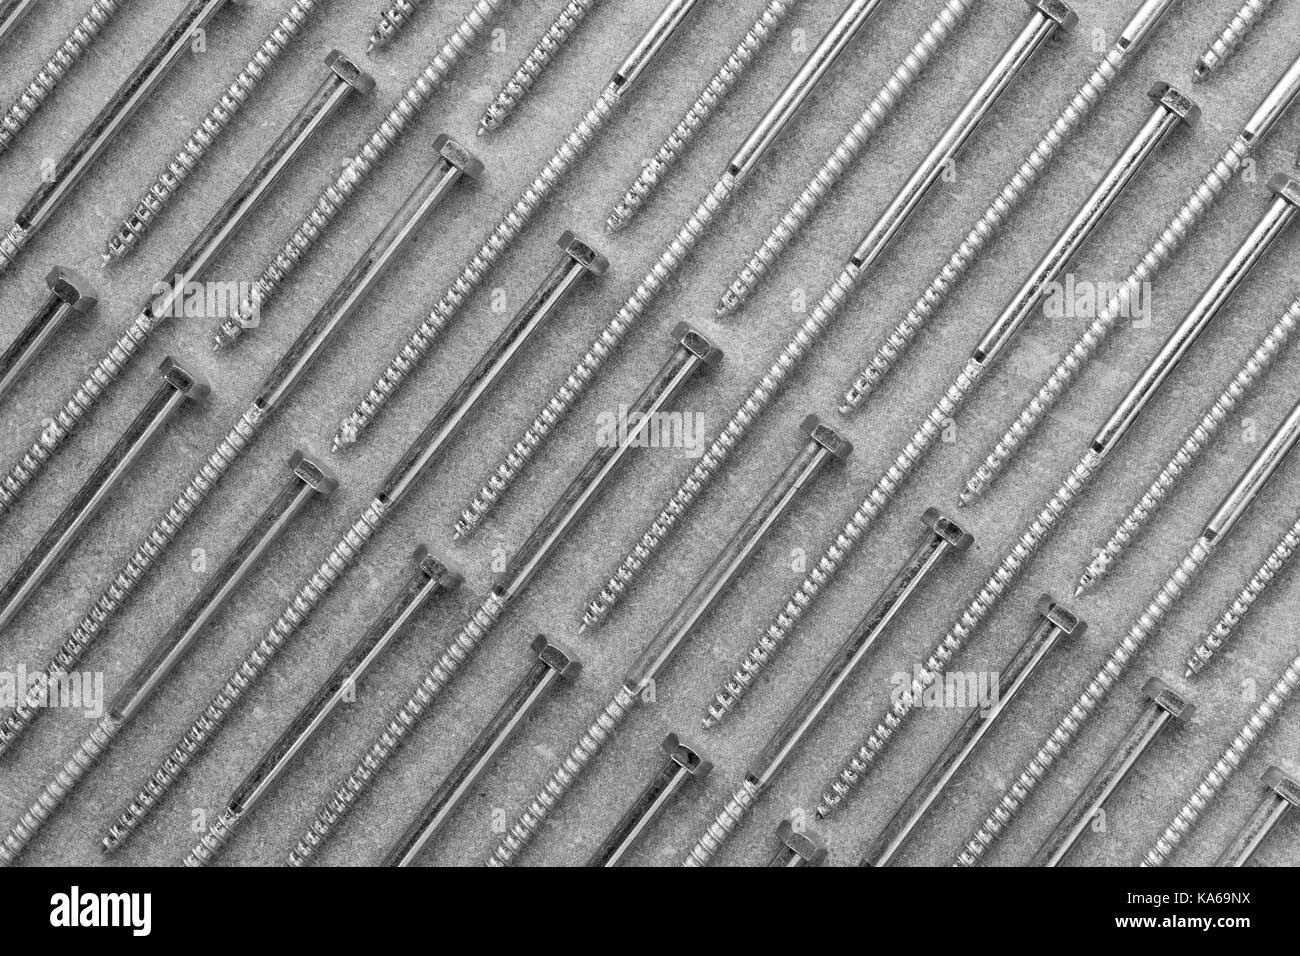 set of new metal screws on a grey background are on the diagonal. black and white photo. Flat lay, top view Stock Photo